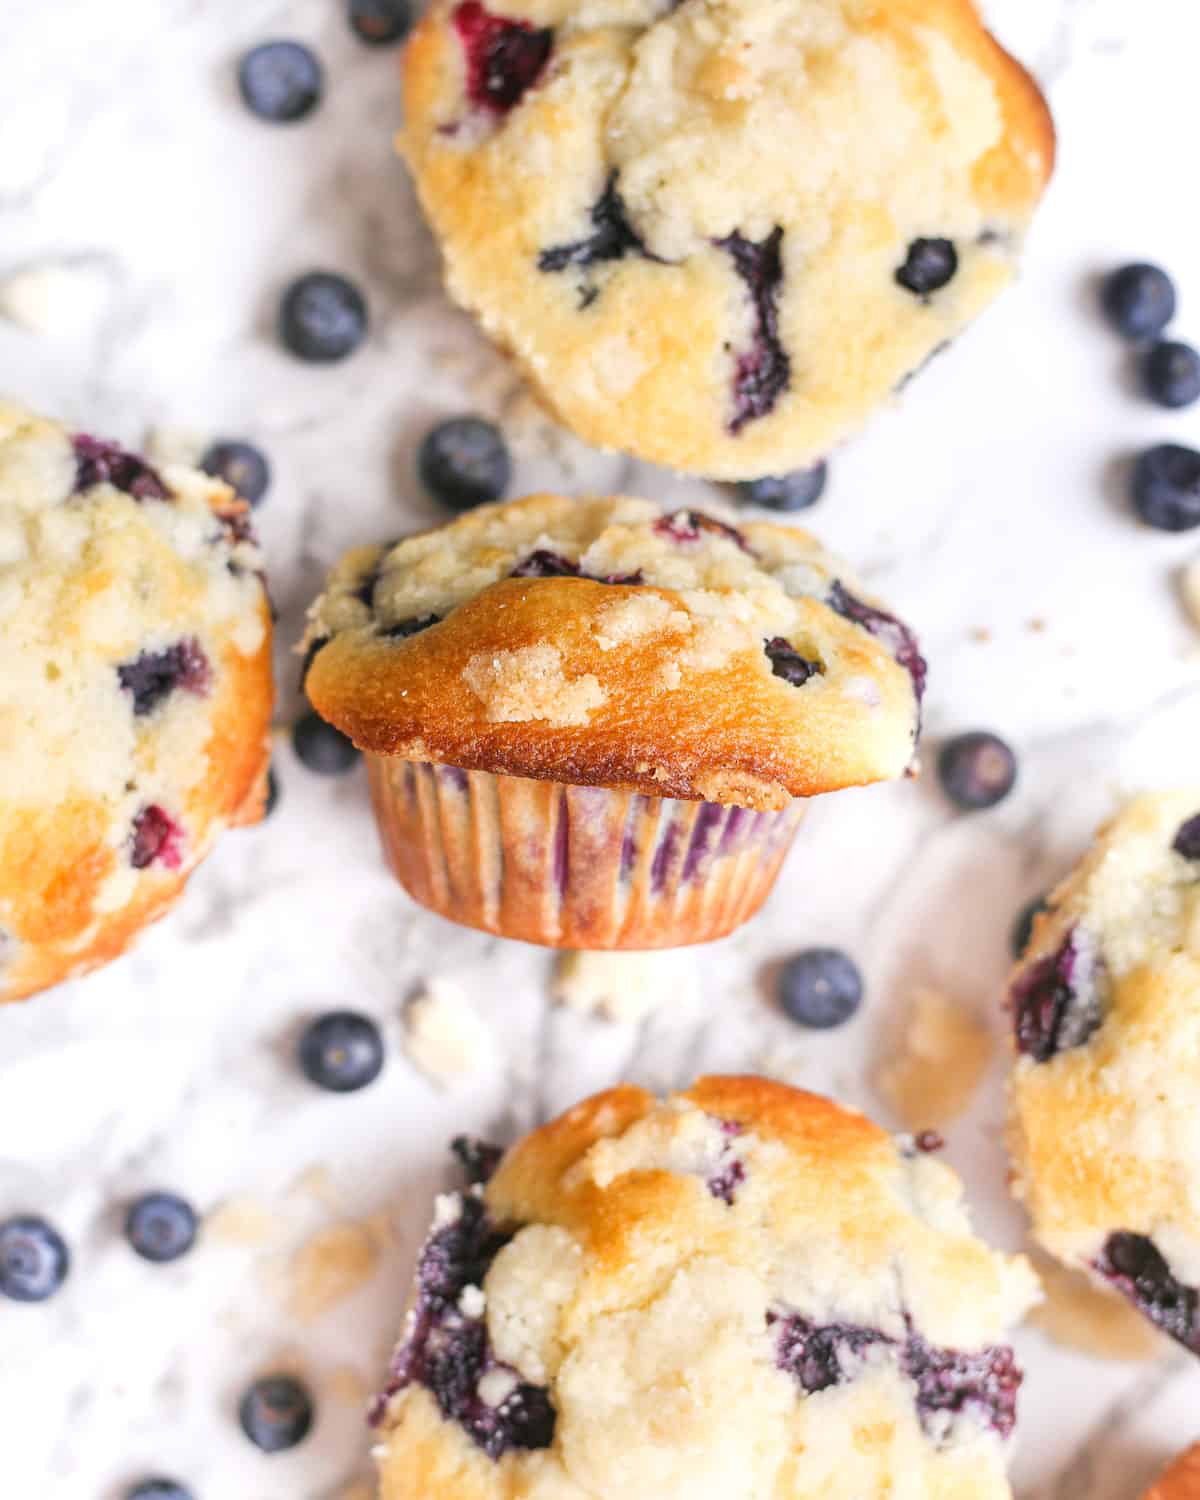 bakery style blueberry streusel muffins with one on its side